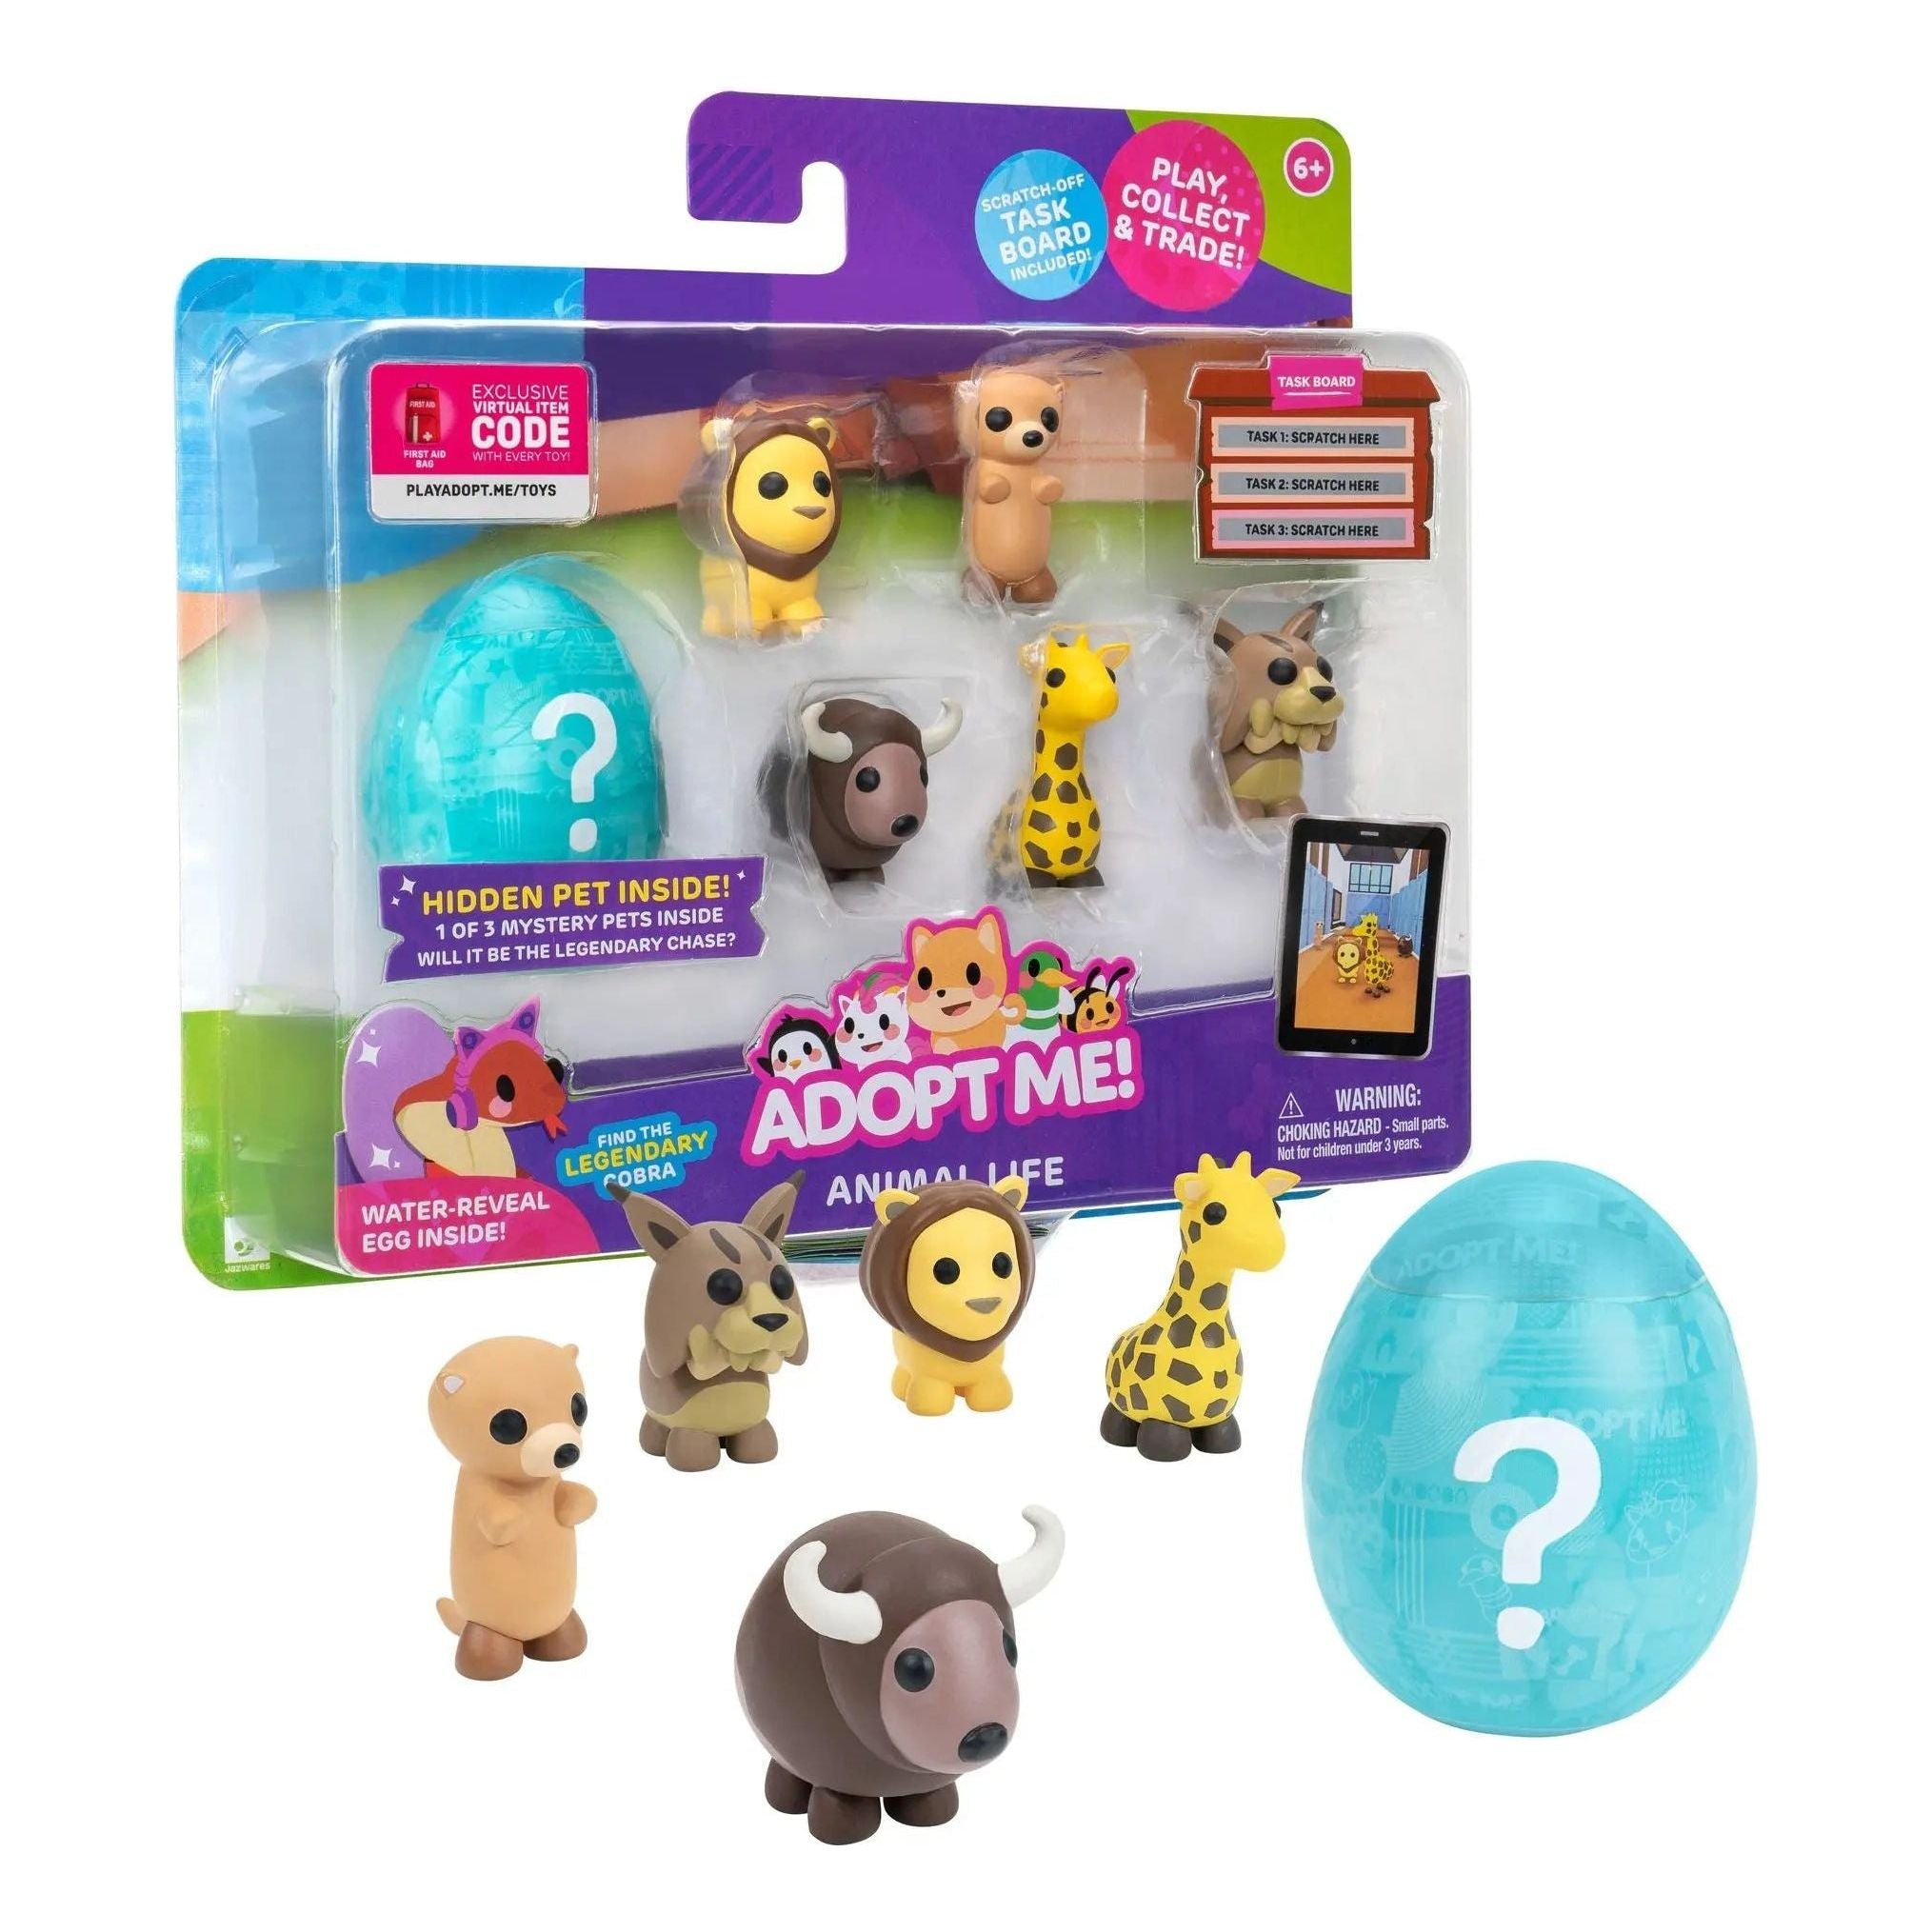  Adopt Me! Pets Multipack Animal Life - Hidden Pet - Top Online  Game, Exclusive Virtual Item Code Included - Fun Collectible Toys for Kids  Featuring Your Favorite Pets, Ages 6+ : Everything Else